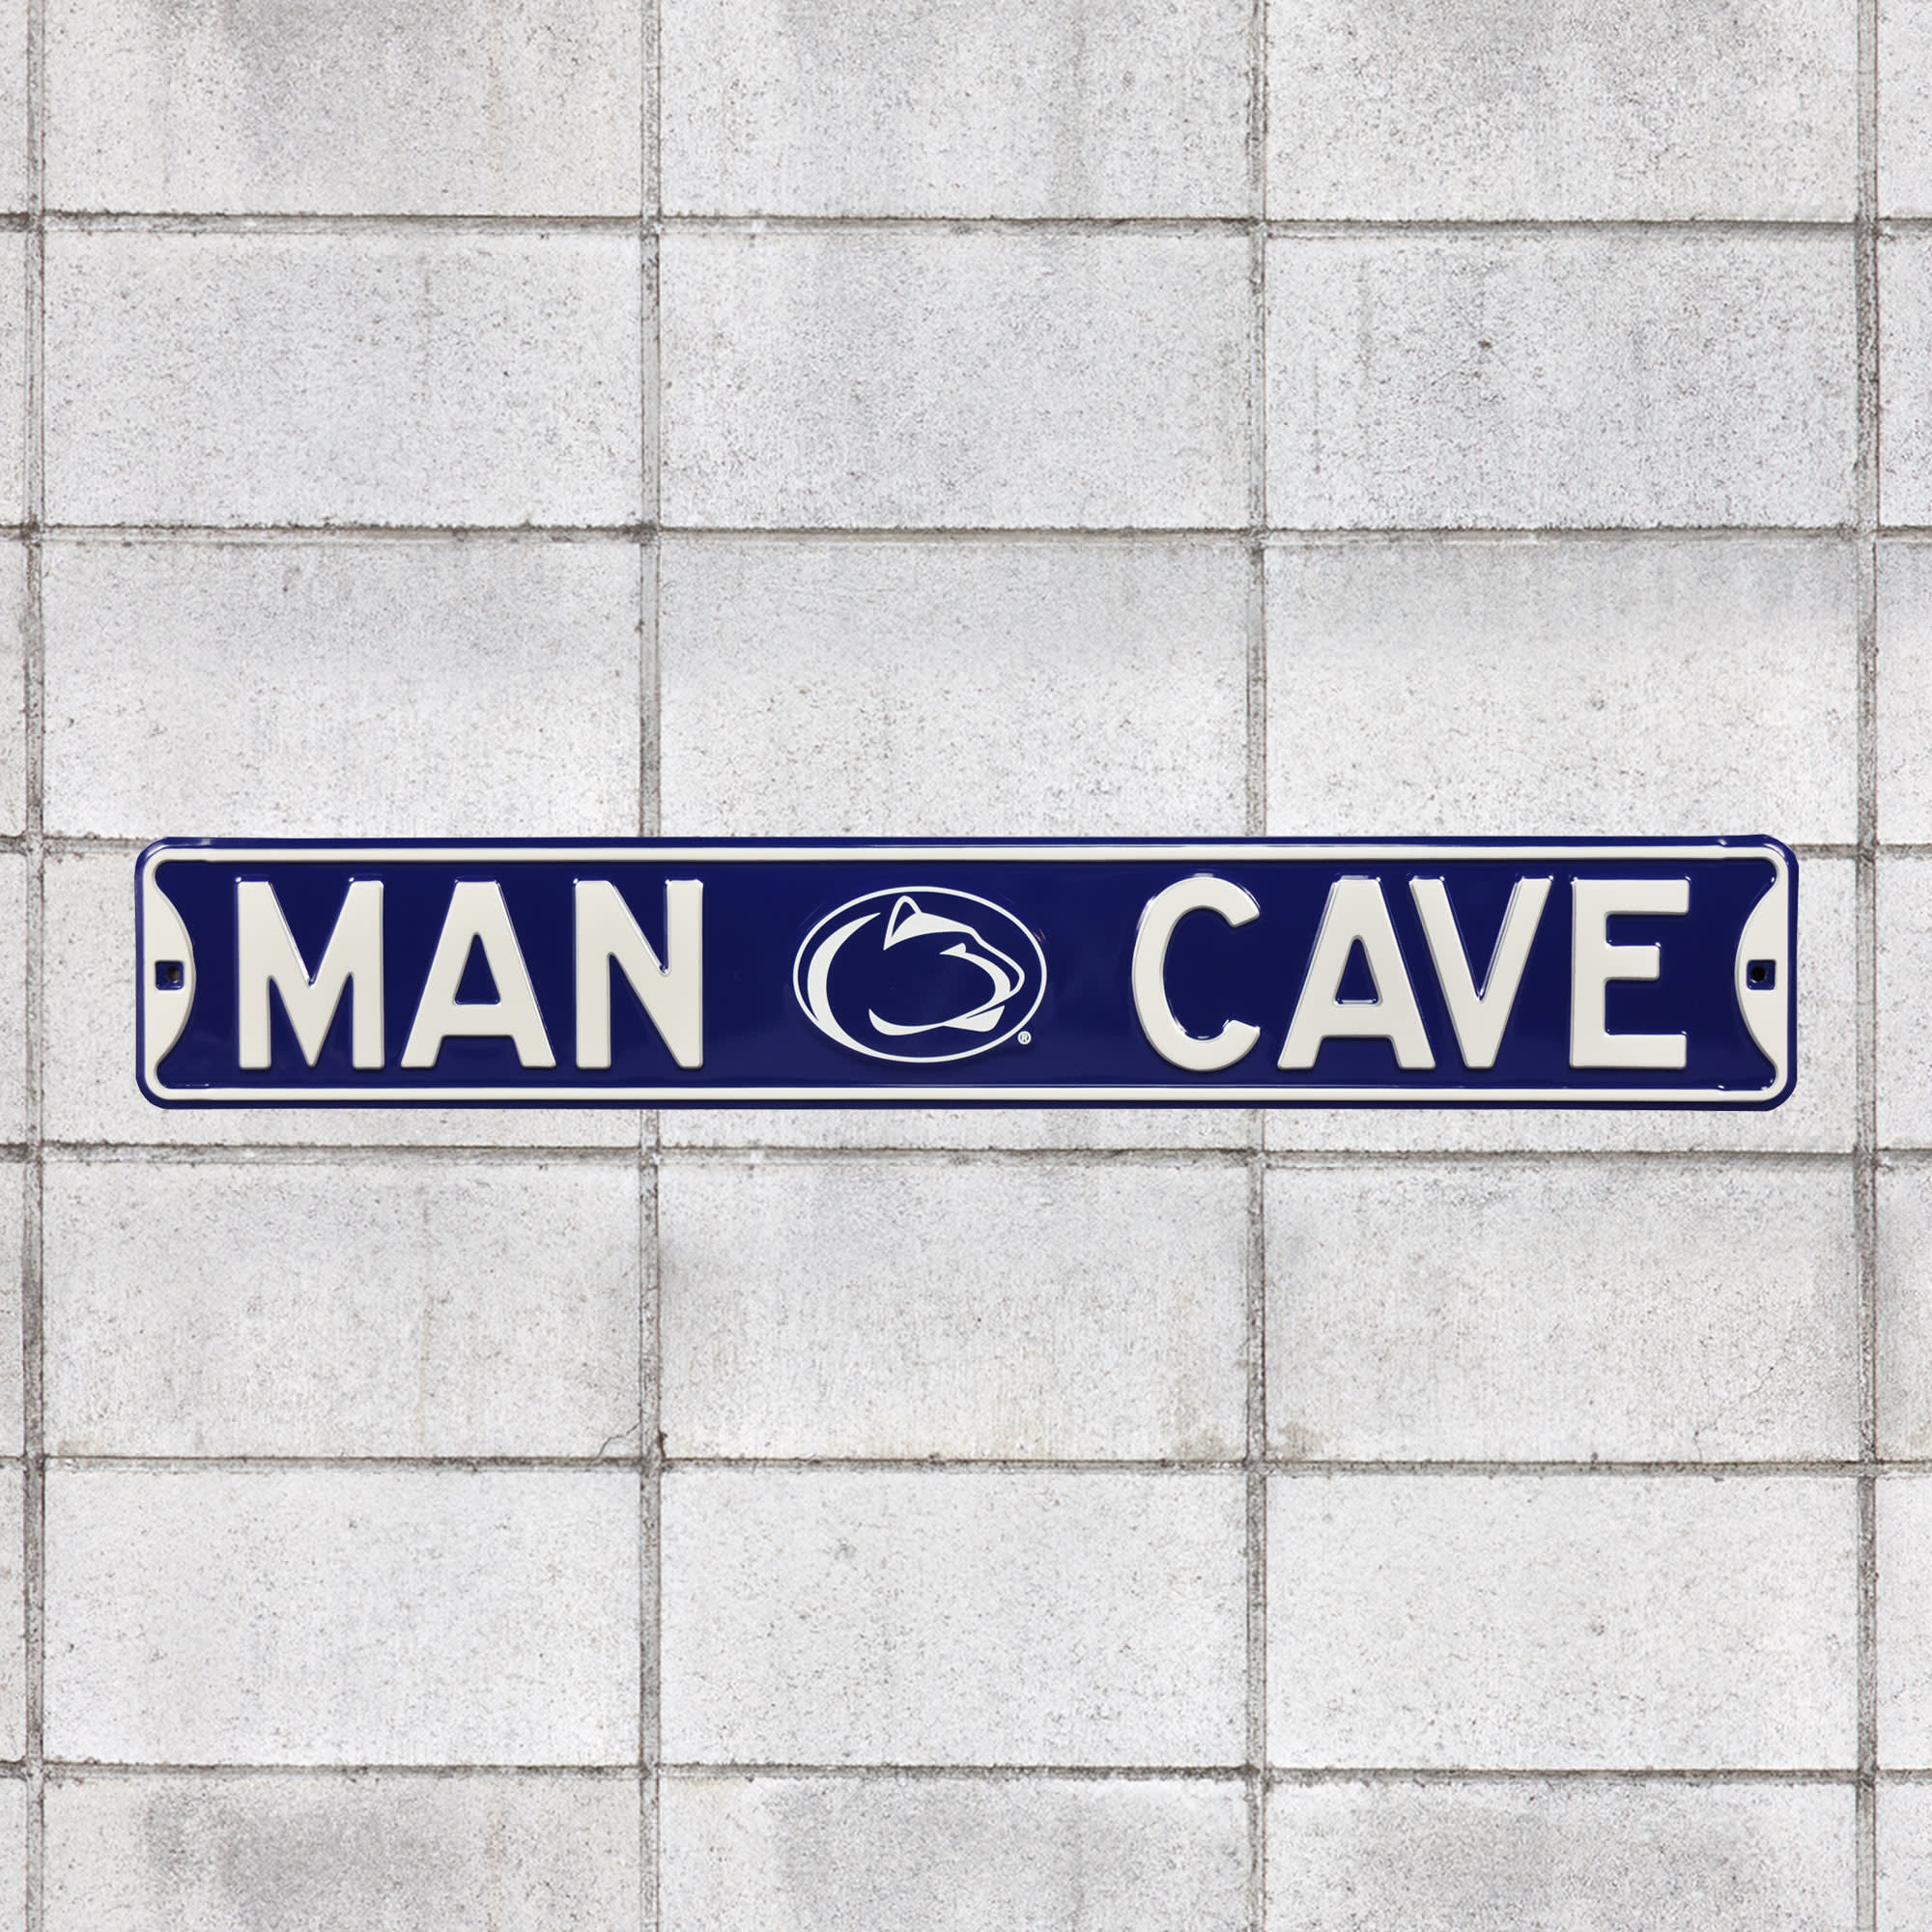 Penn State Nittany Lions: Man Cave - Officially Licensed Metal Street Sign 36.0"W x 6.0"H by Fathead | 100% Steel